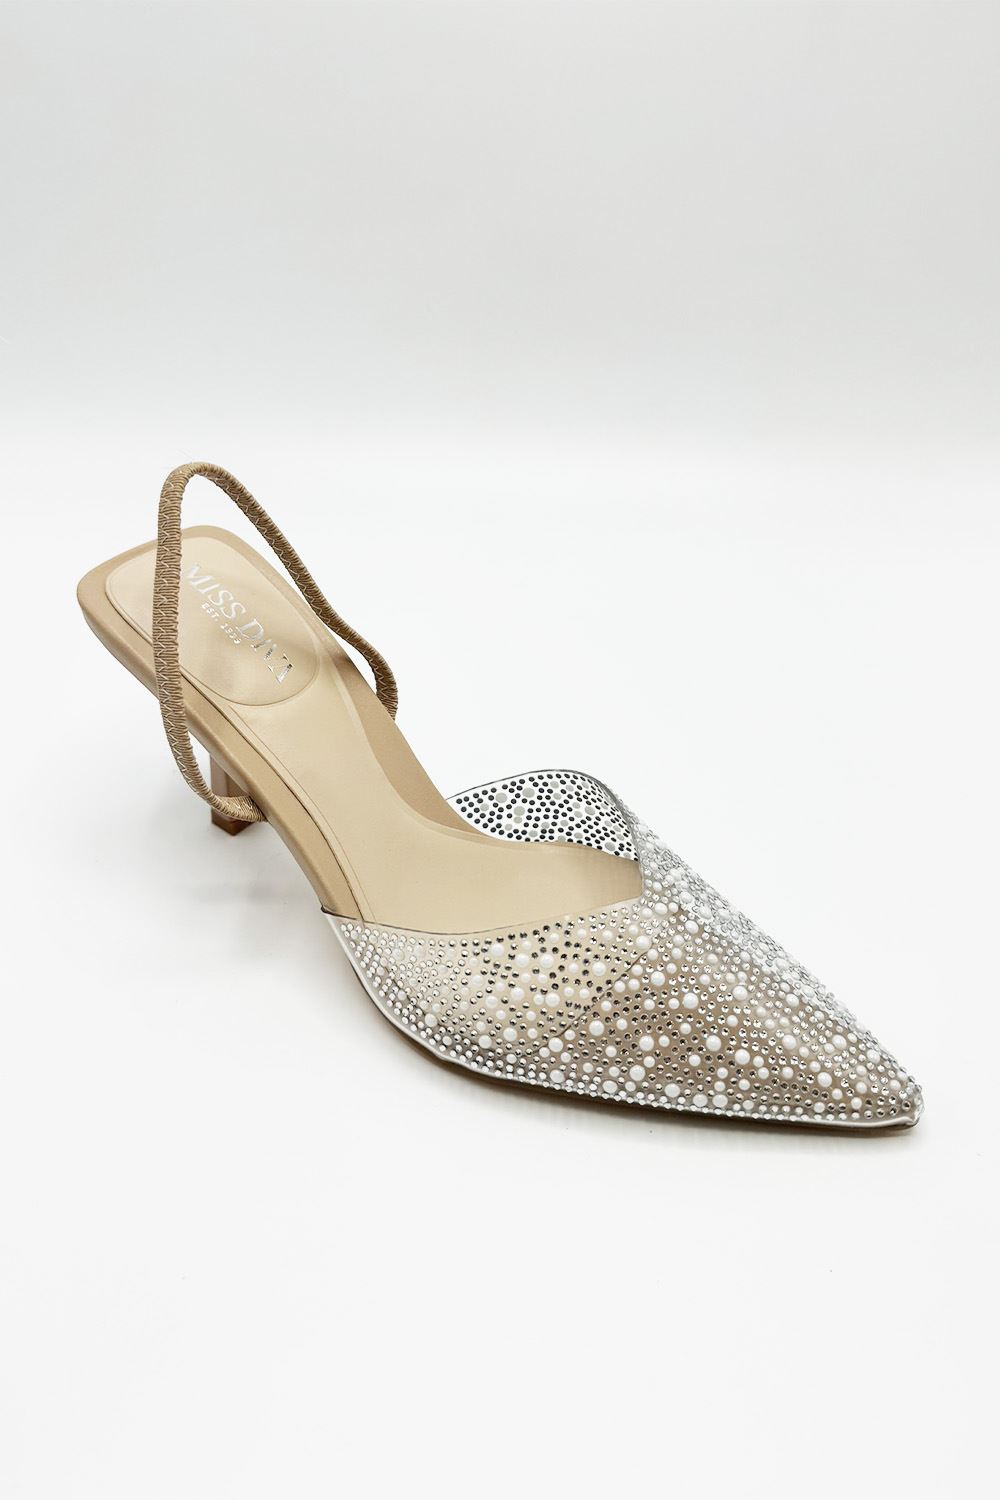 Miss Diva Kiana Diamante Embellished Sling Back Pointed Toe Court Shoes in Nude